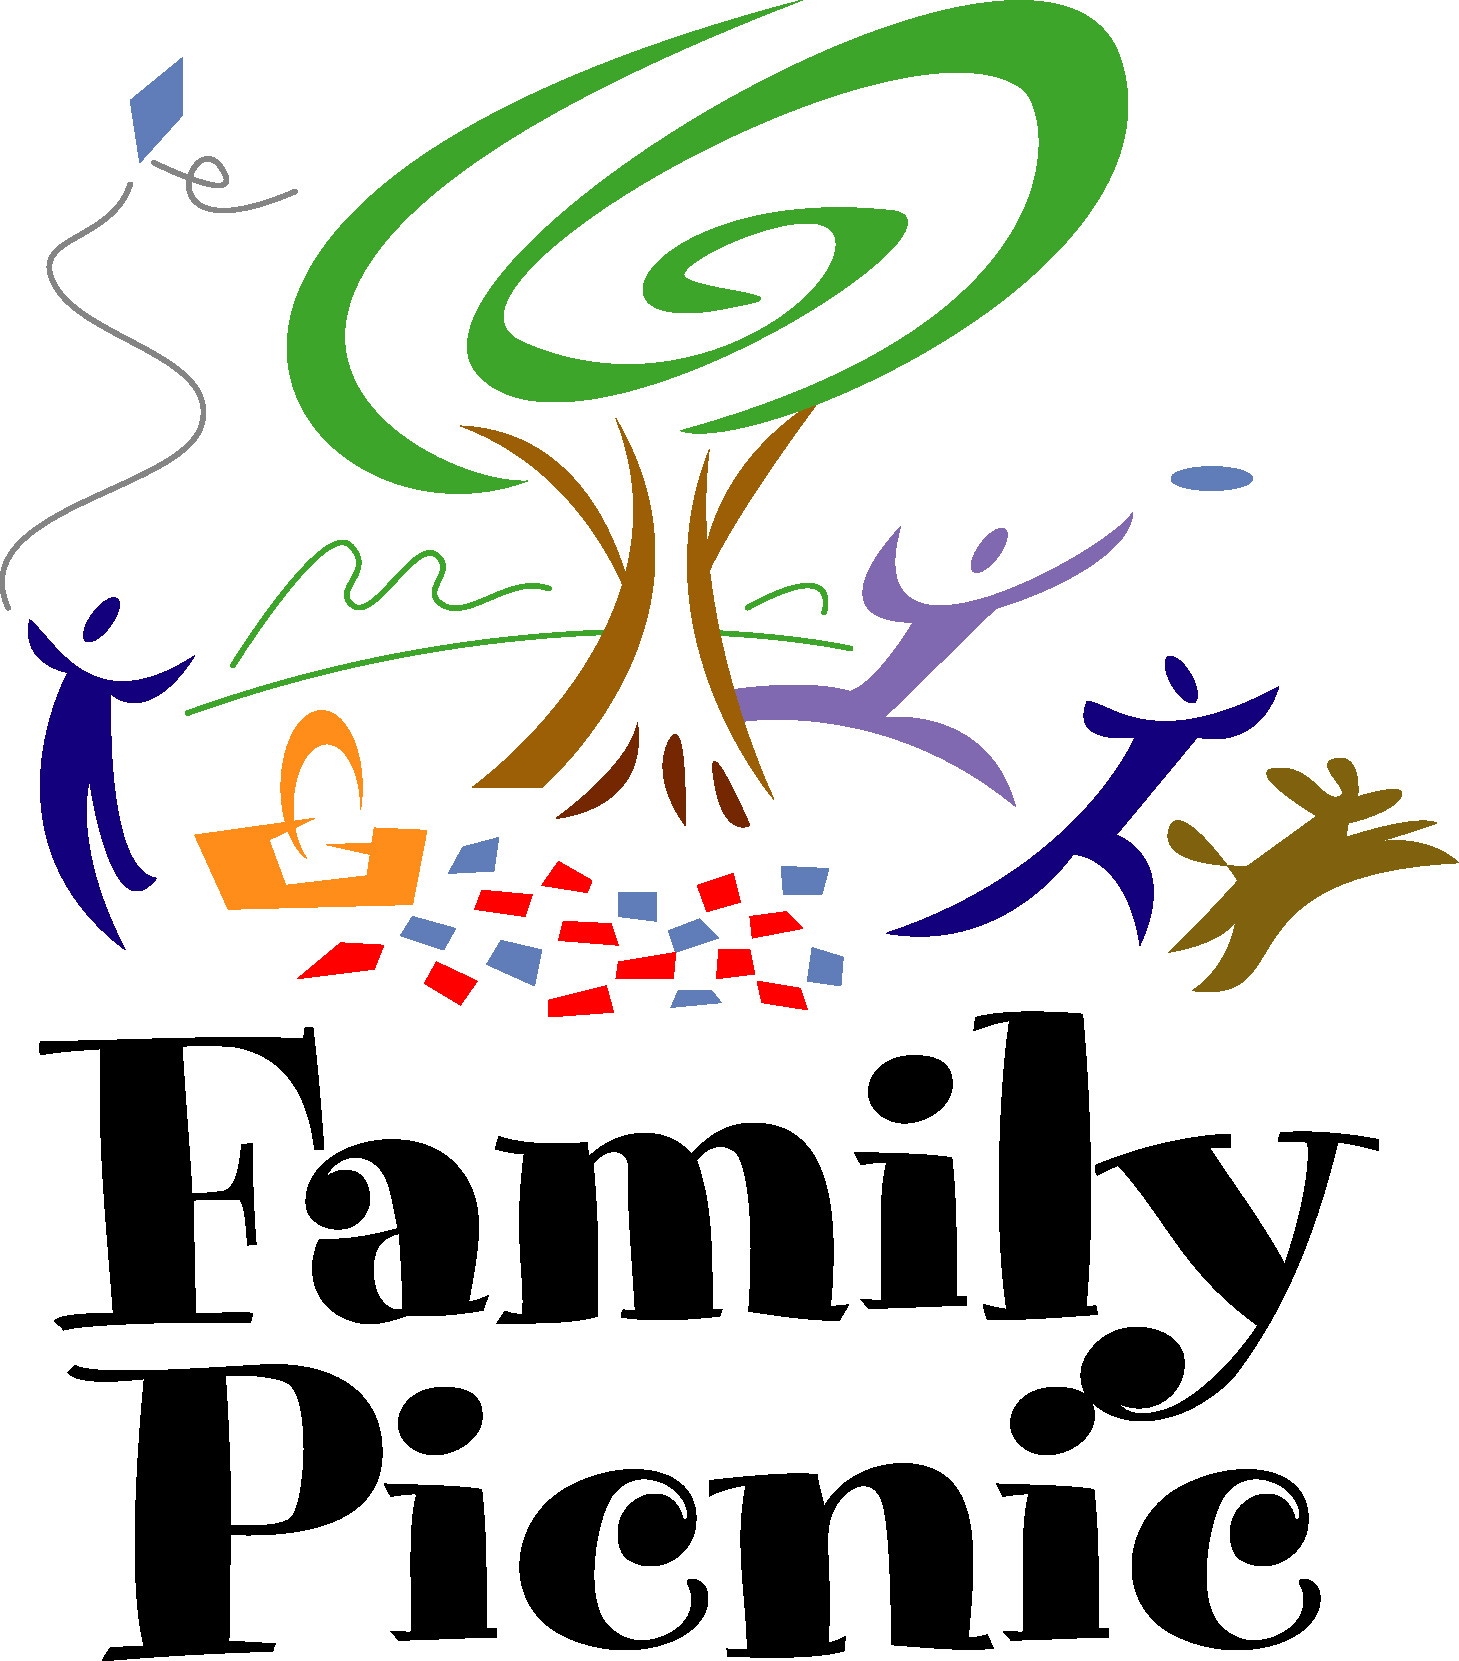 Picnic Clip Art Borders | Clipart library - Free Clipart Images